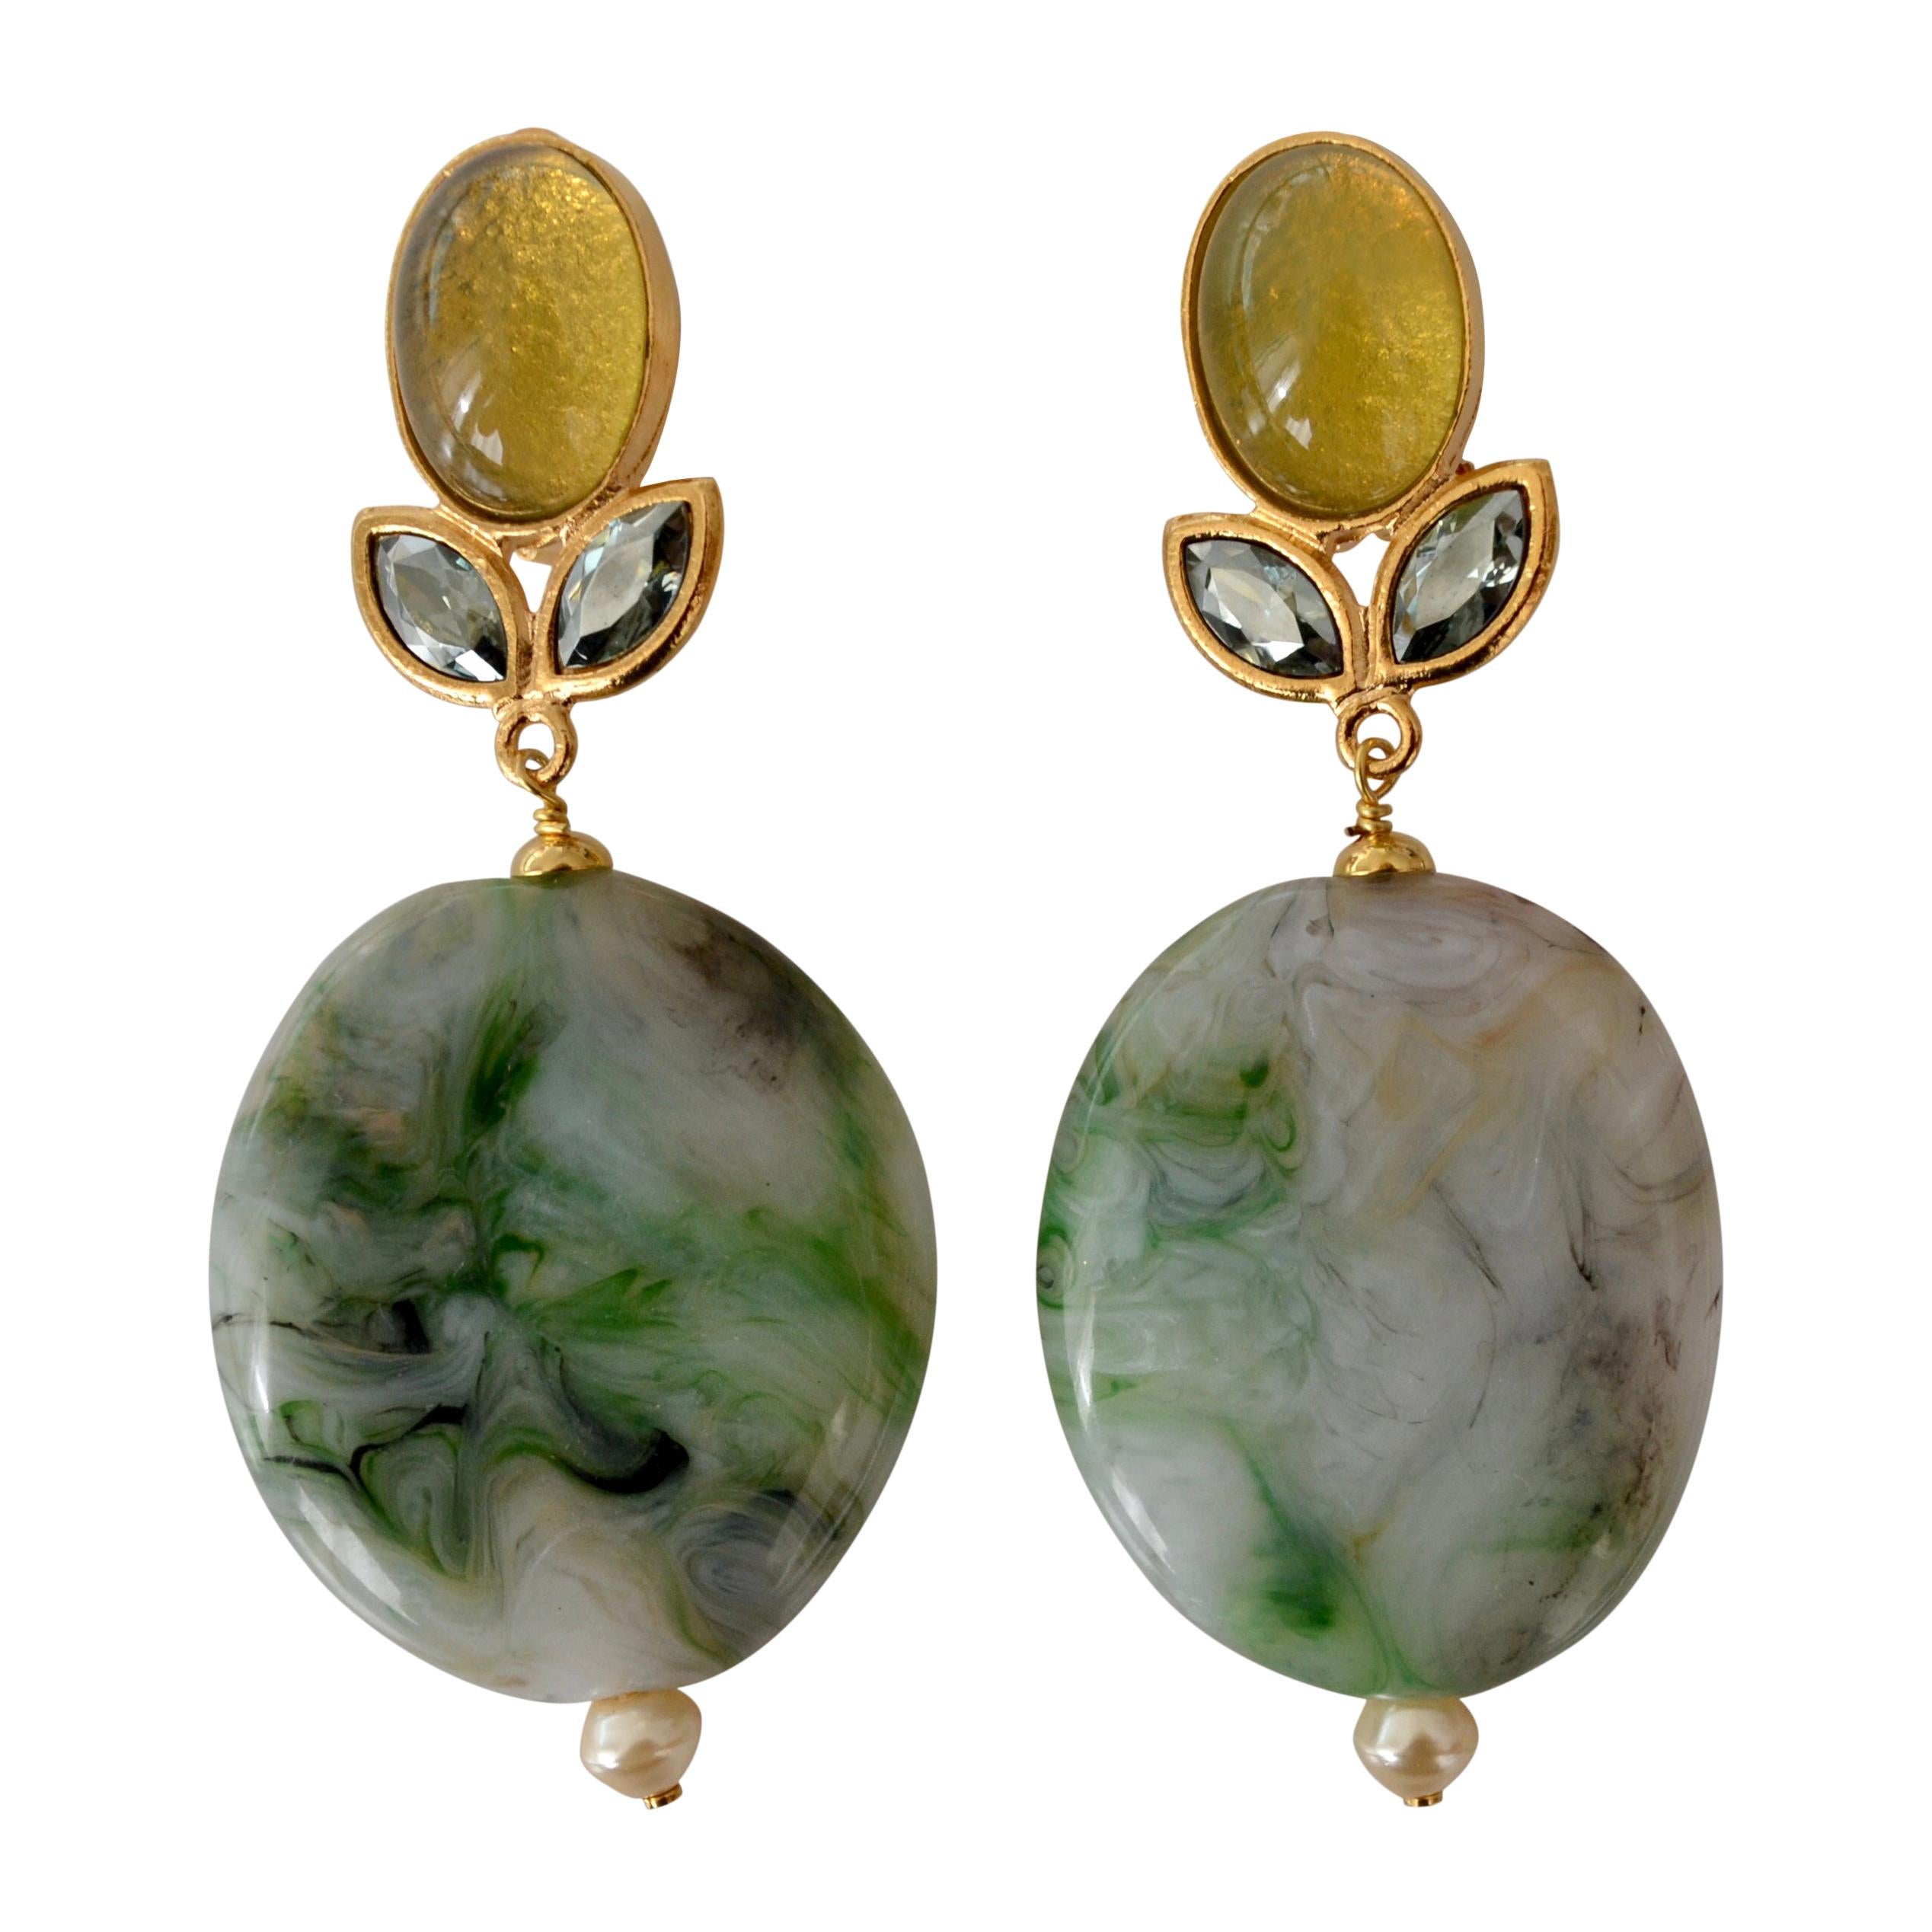 Philippe Ferrandis Agate and Glass Clip Earrings